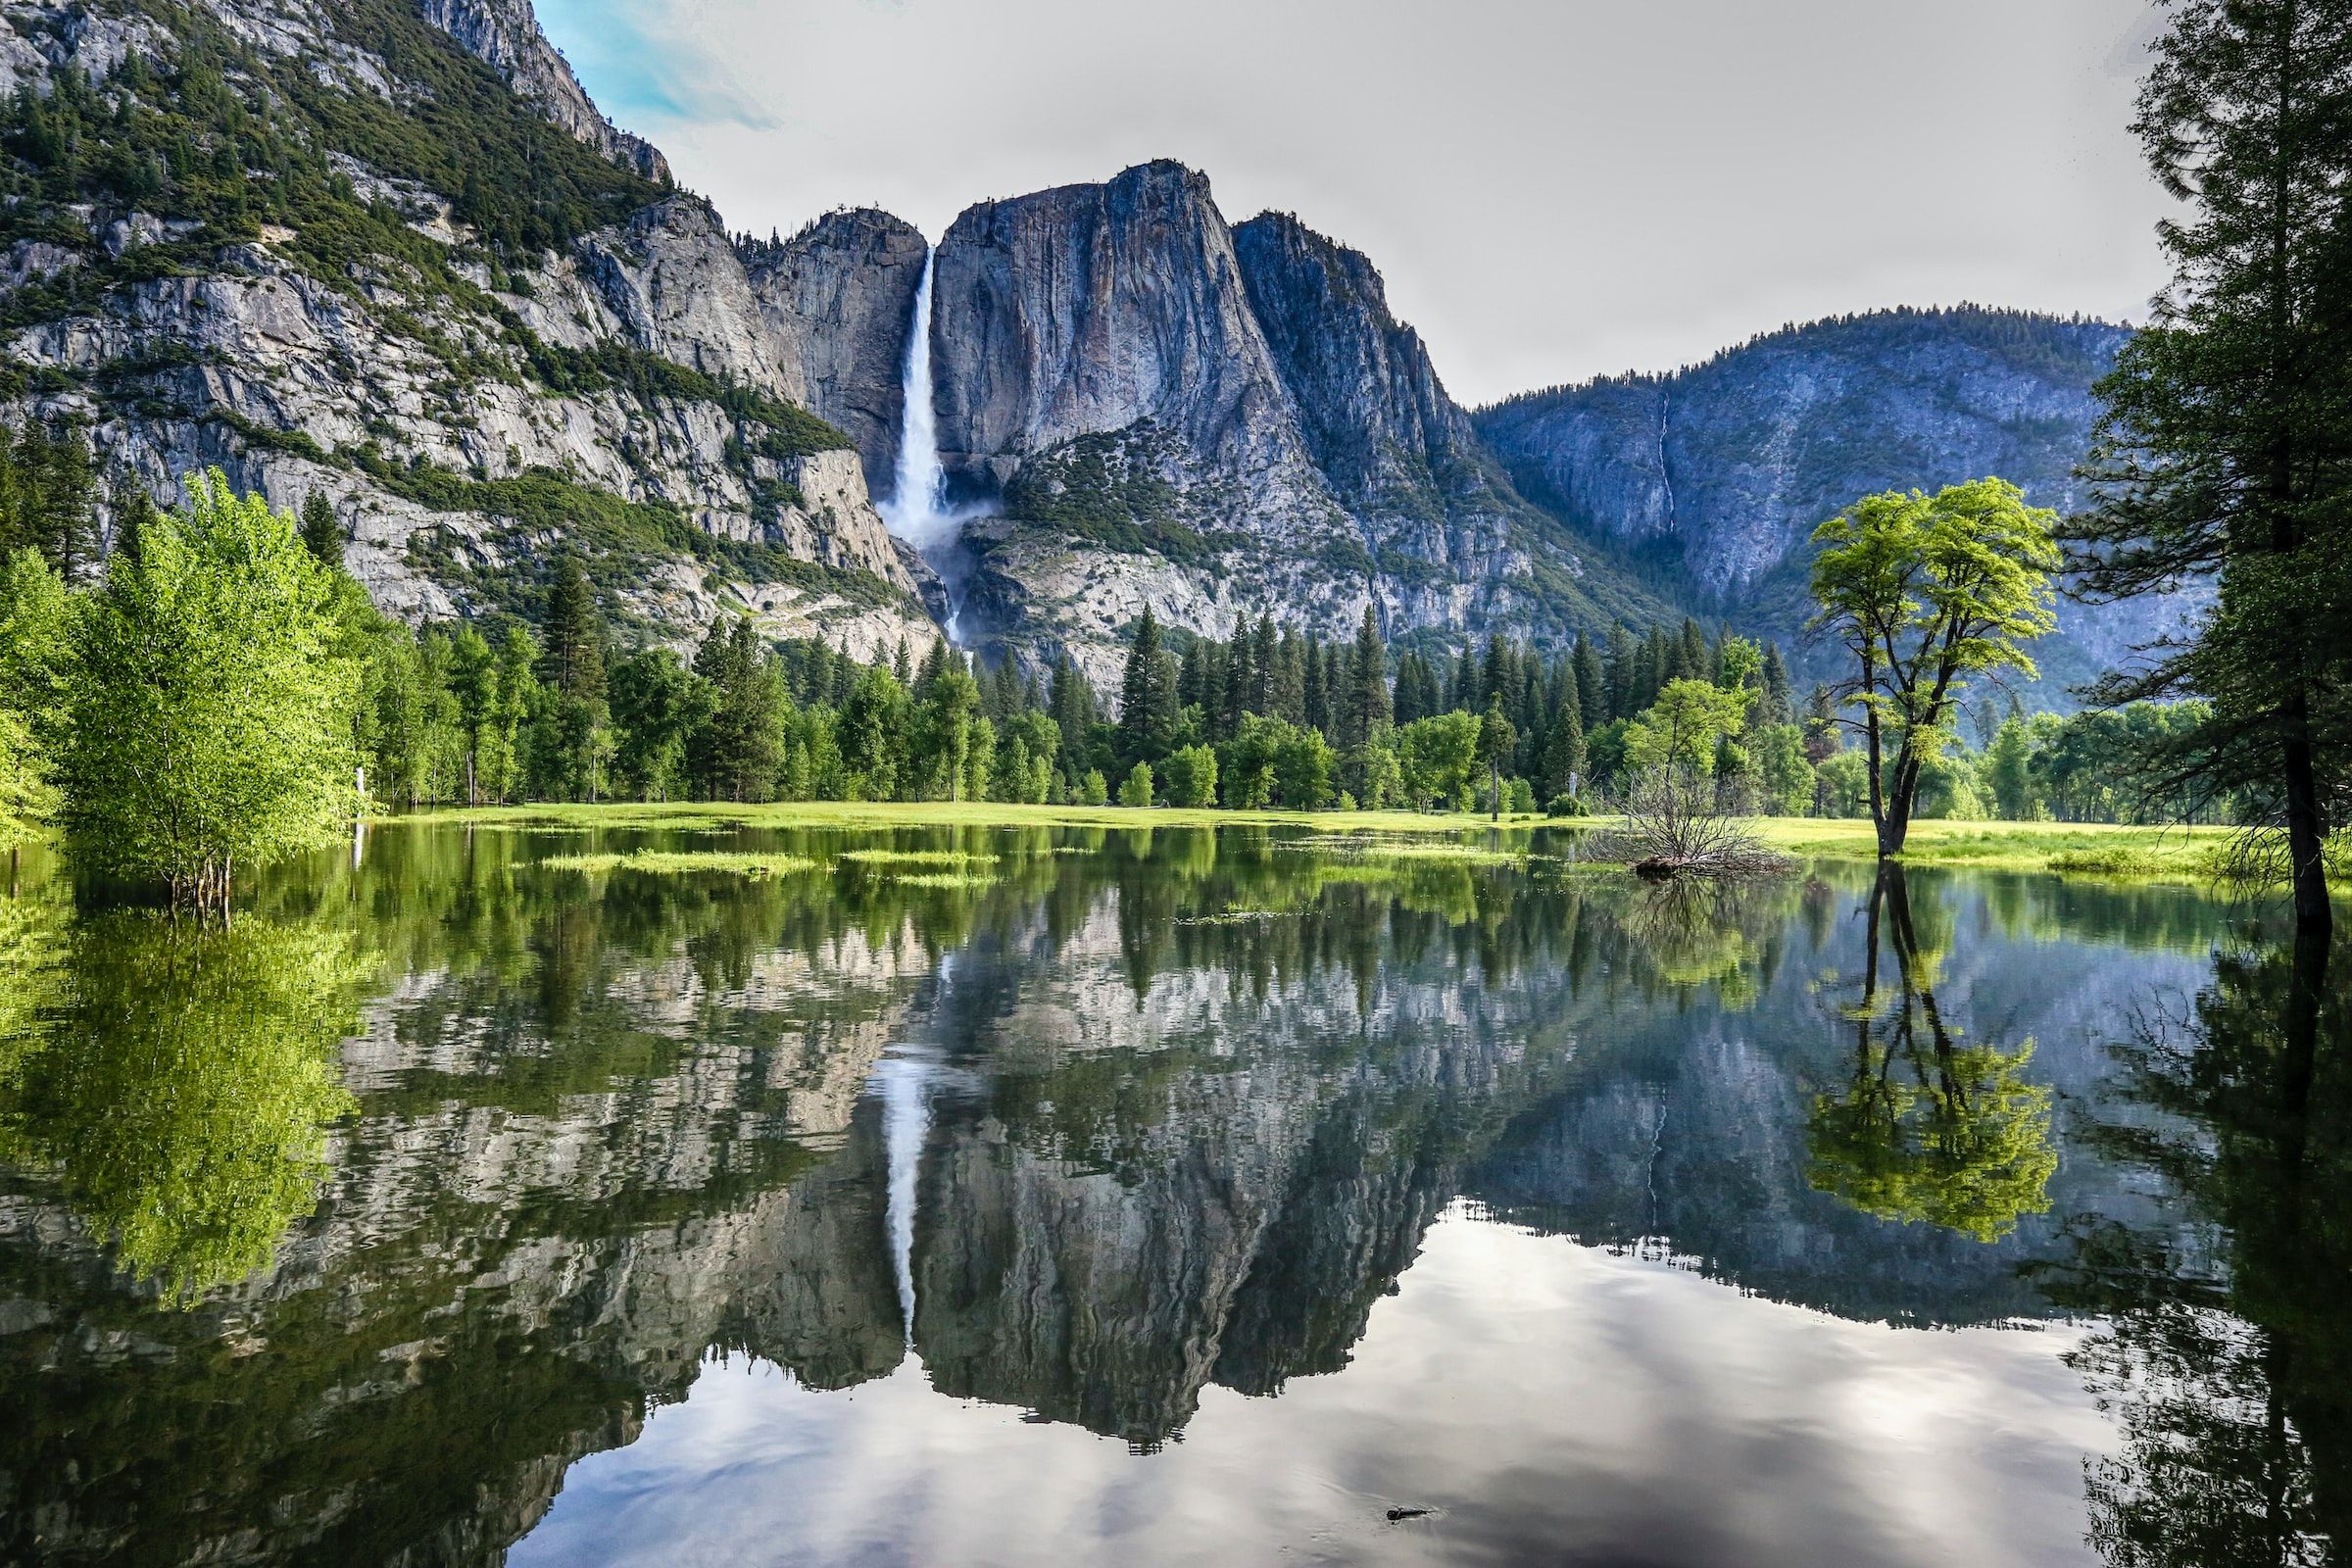 Cliffs and lakes of Yosemite National Park in California, USA